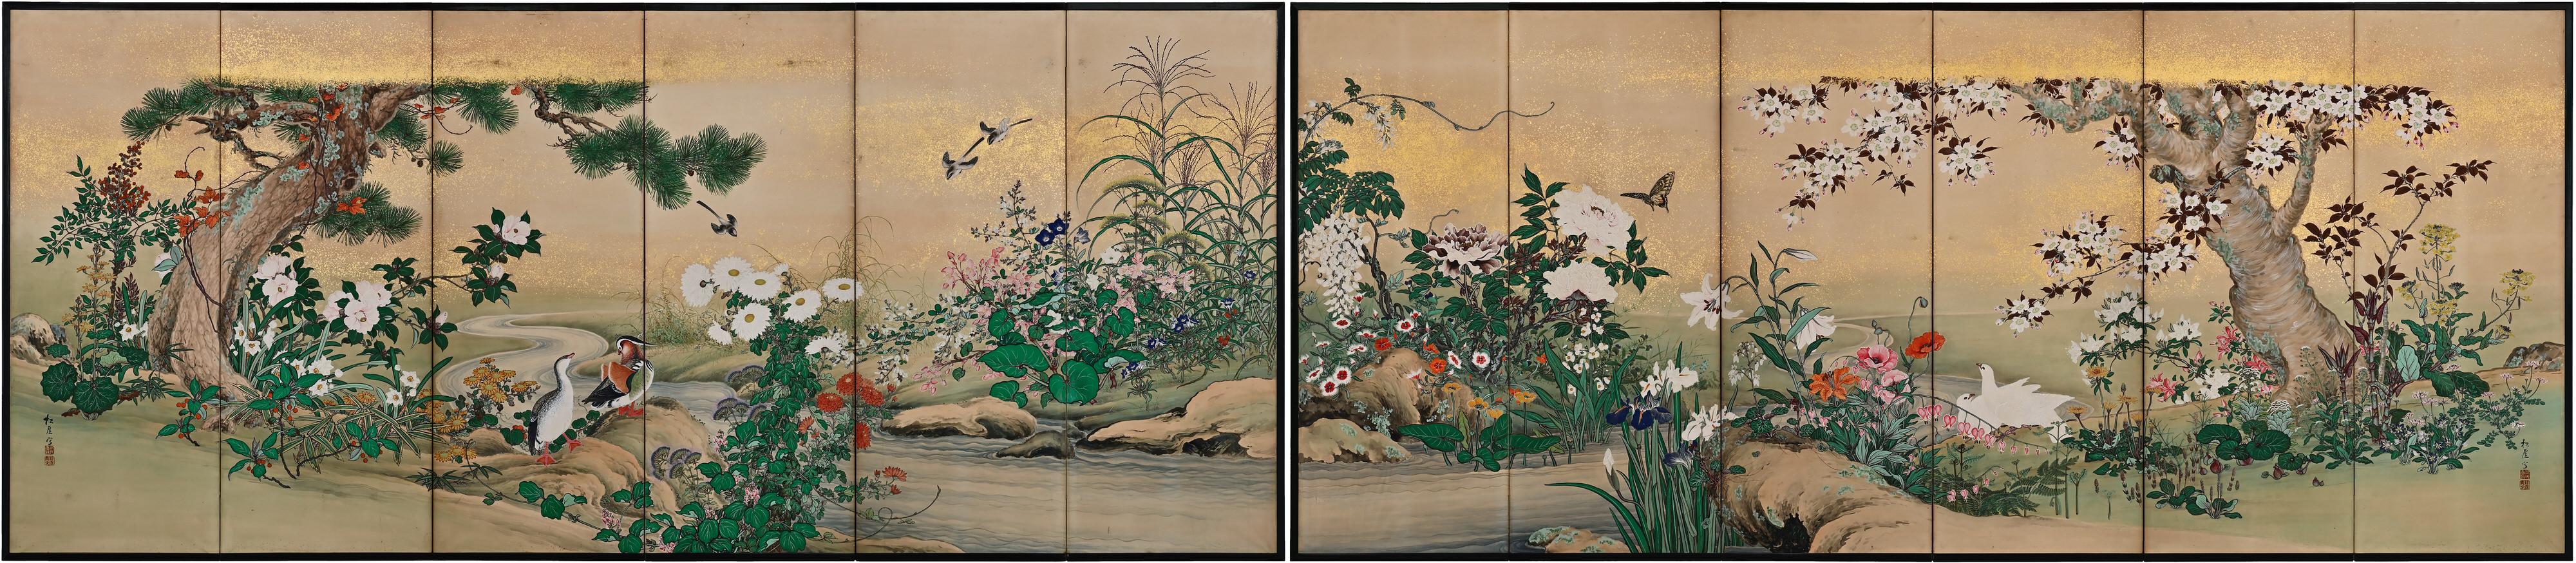 Flowers & Birds of the Four Seasons

Pair of six-fold Japanese Screens. Ink, color, gofun and gold on paper.

Second half of the 19th Century

A pair of mid-size Japanese screens from the second half of the 19th century. Through precise